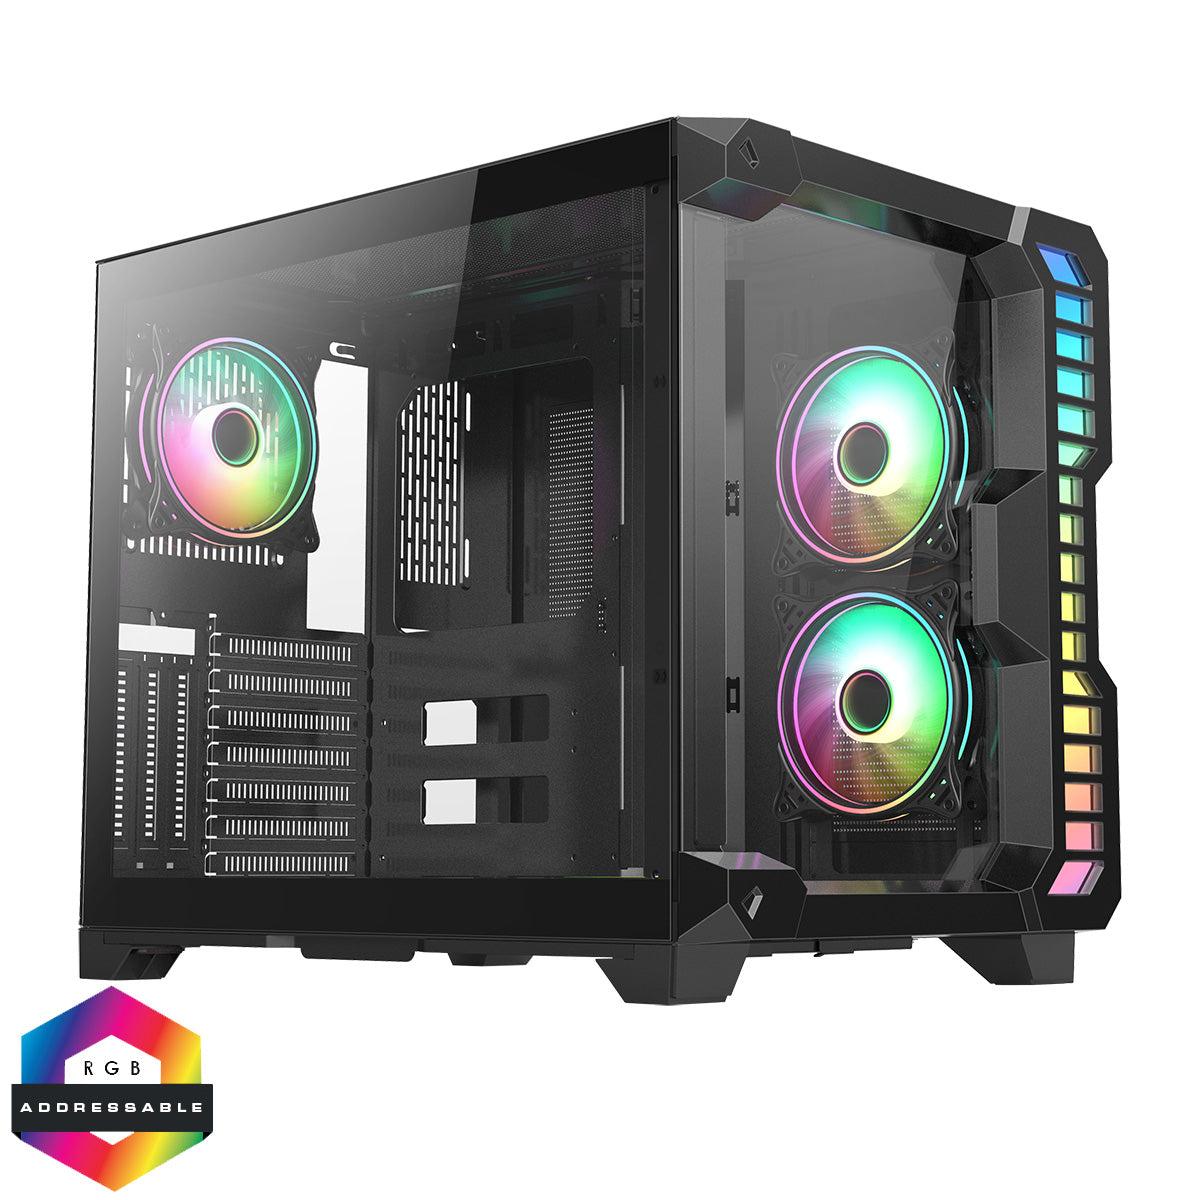 CiT Pro Android X ARGB Gaming PC Case With Tempered Glass Panels - Black